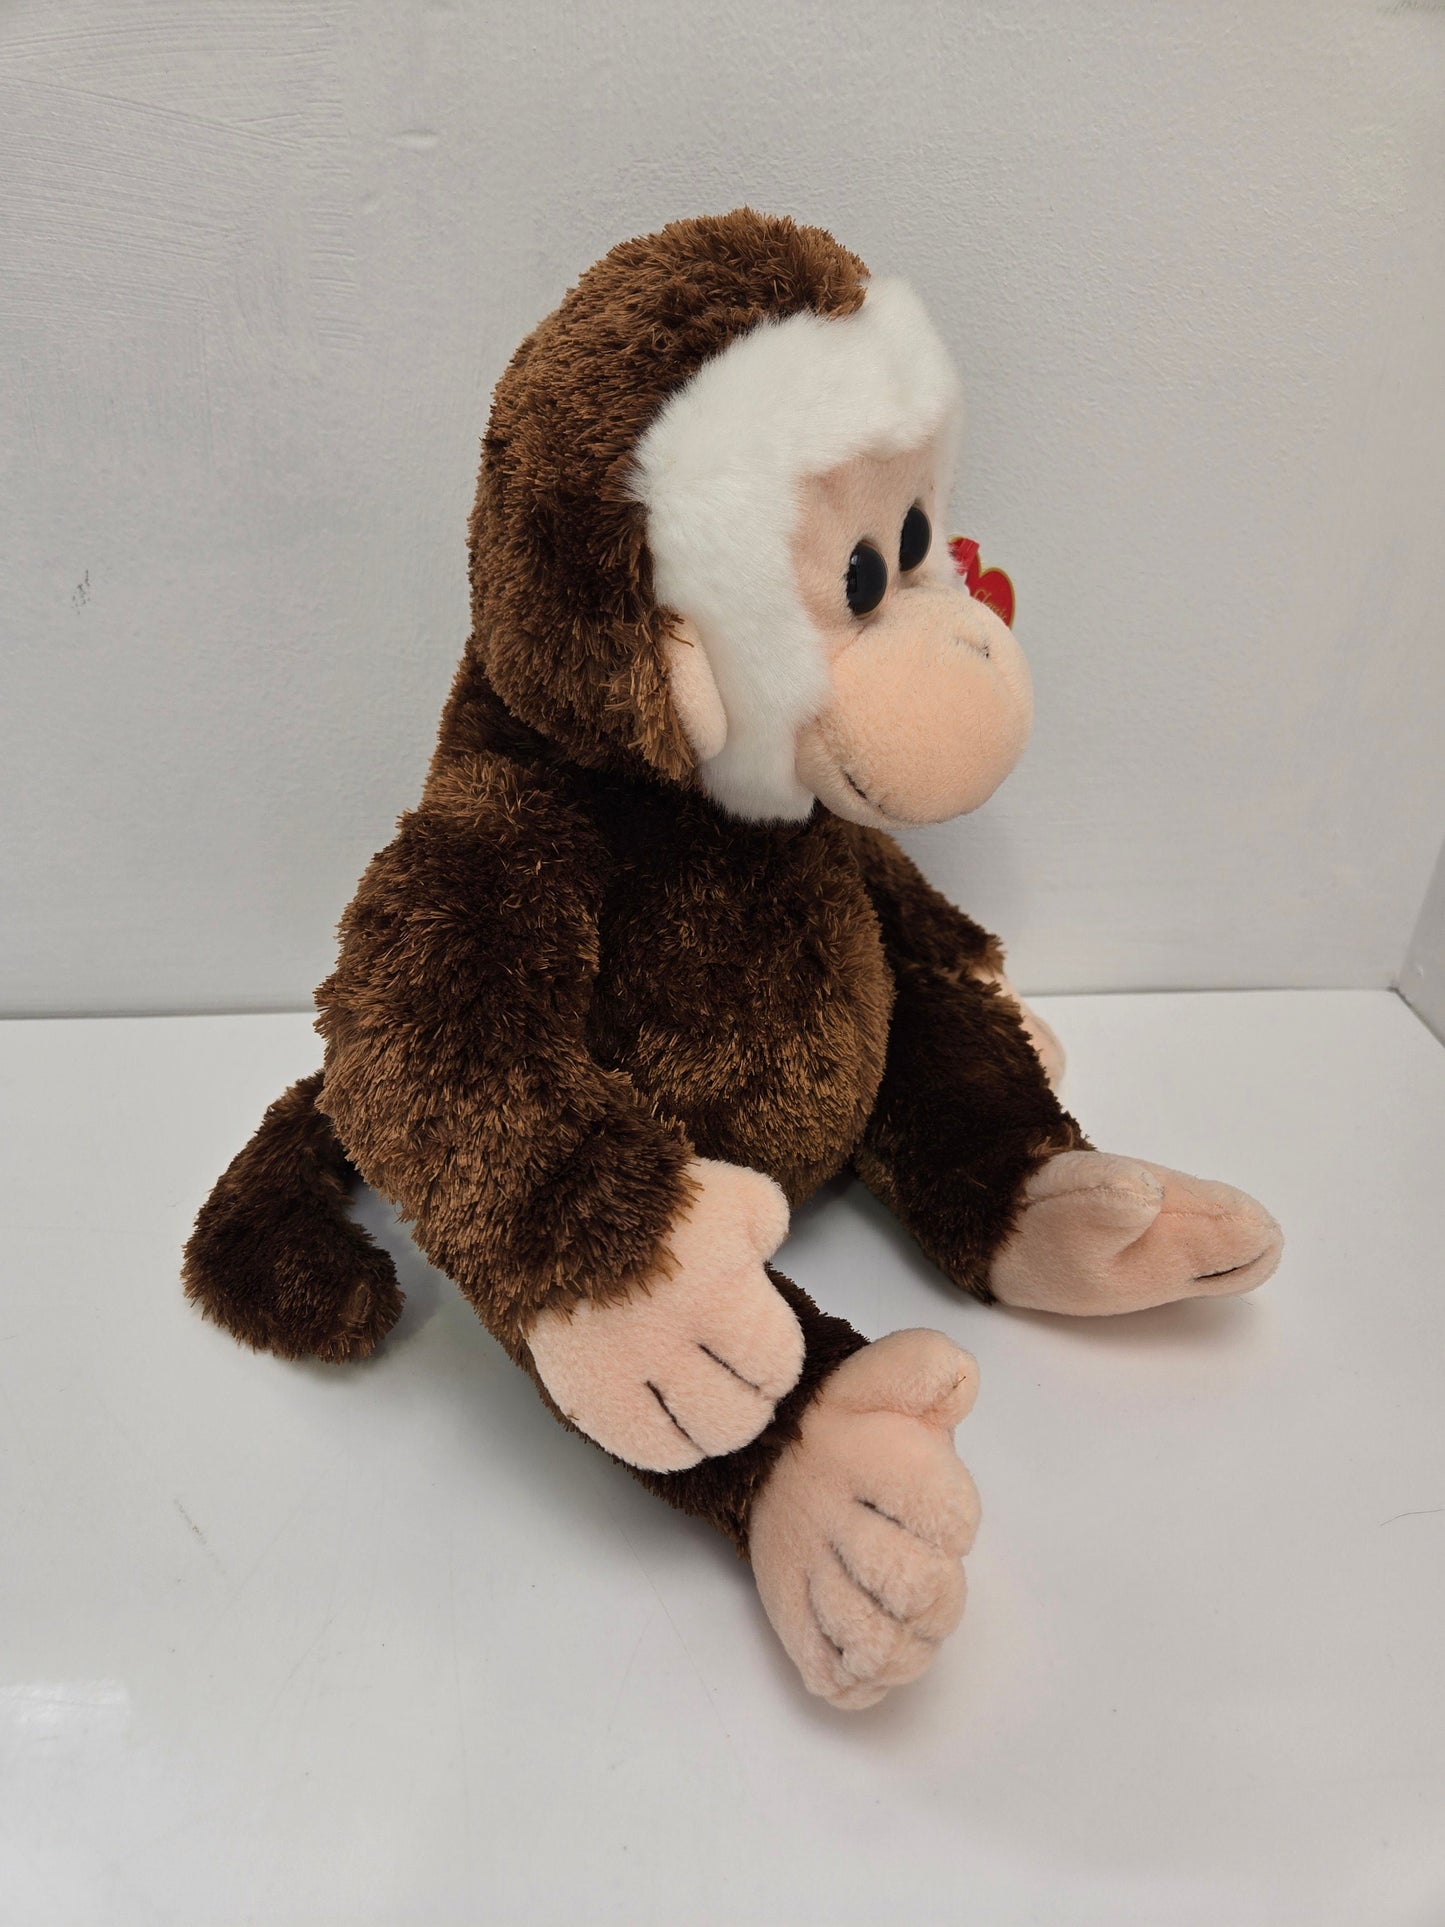 Ty Classics Collection “Hoodwink” the Monkey Rare! (12 inch)